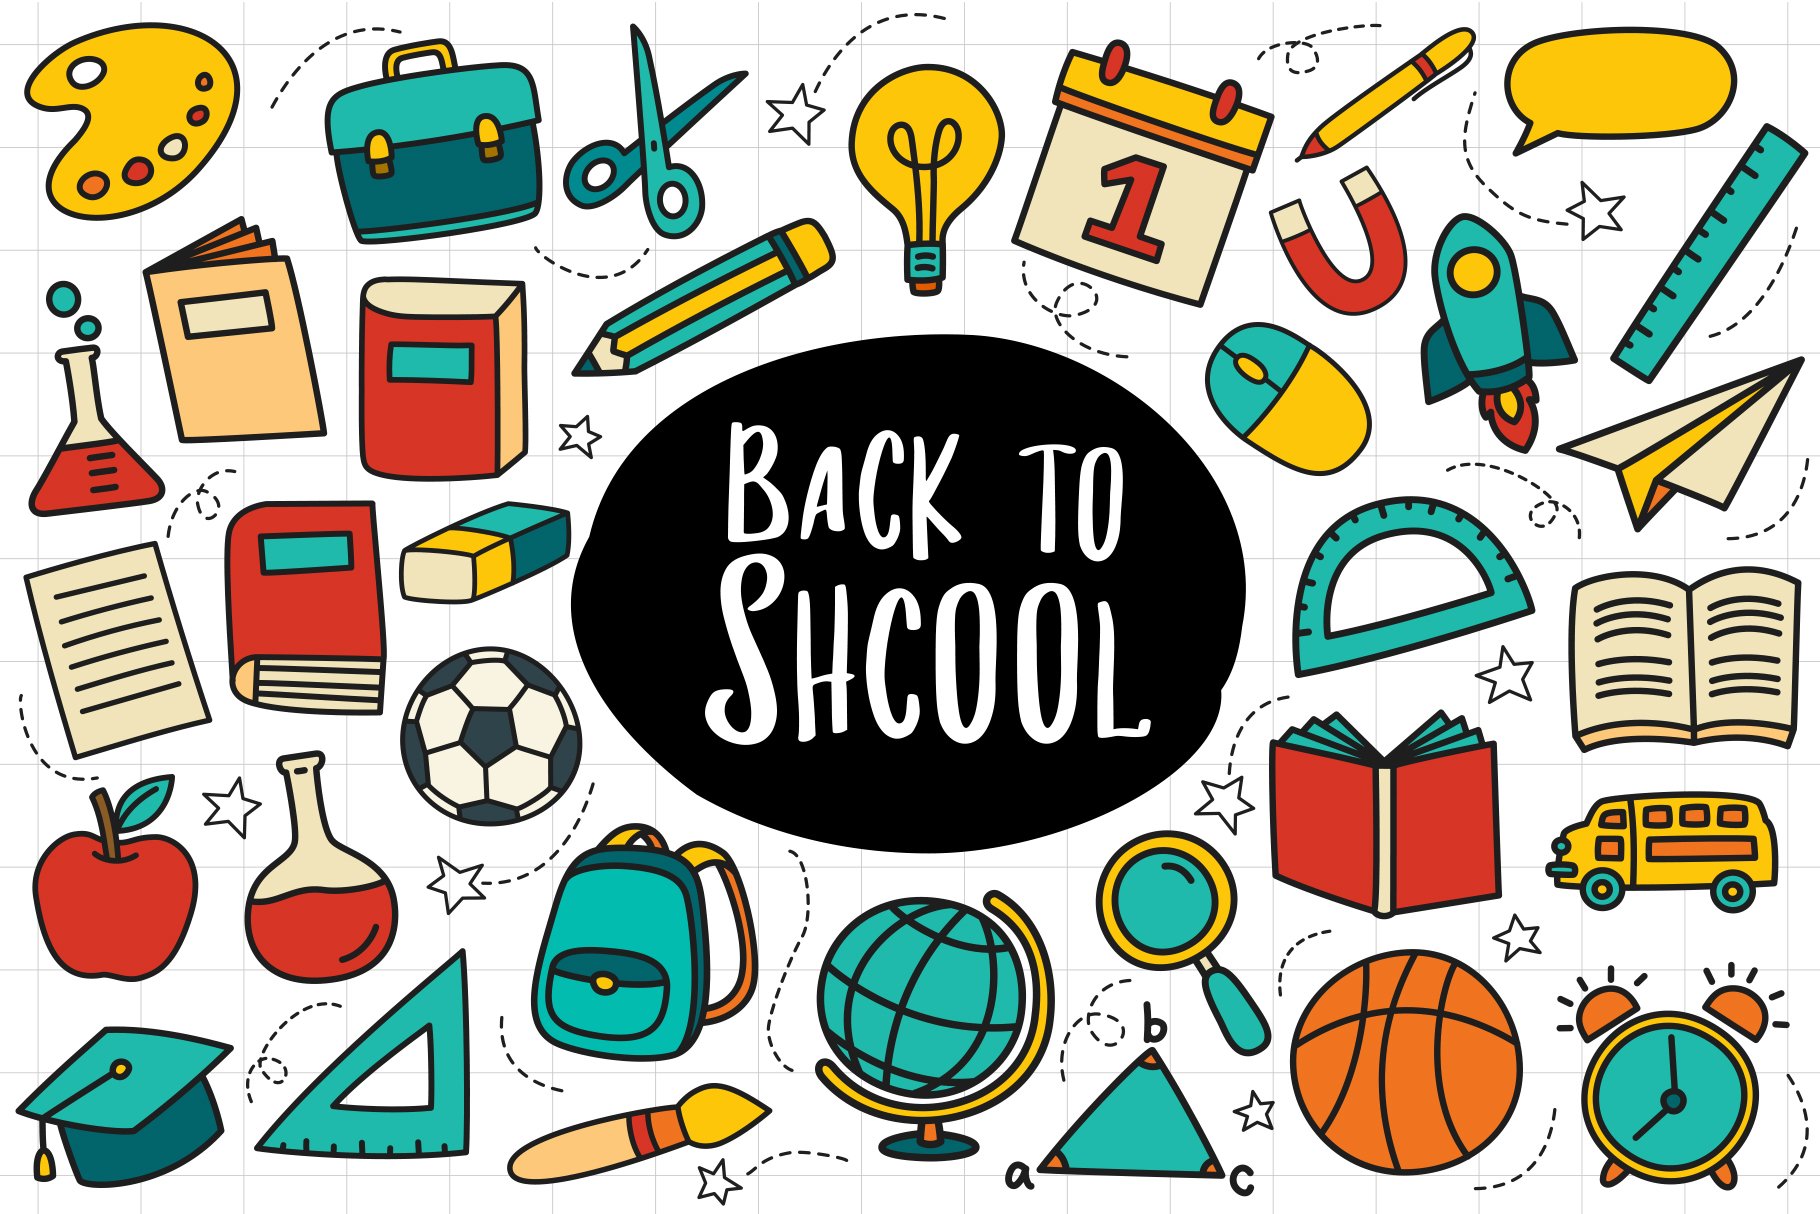 Back to School Icon Set Doodle Style cover image.